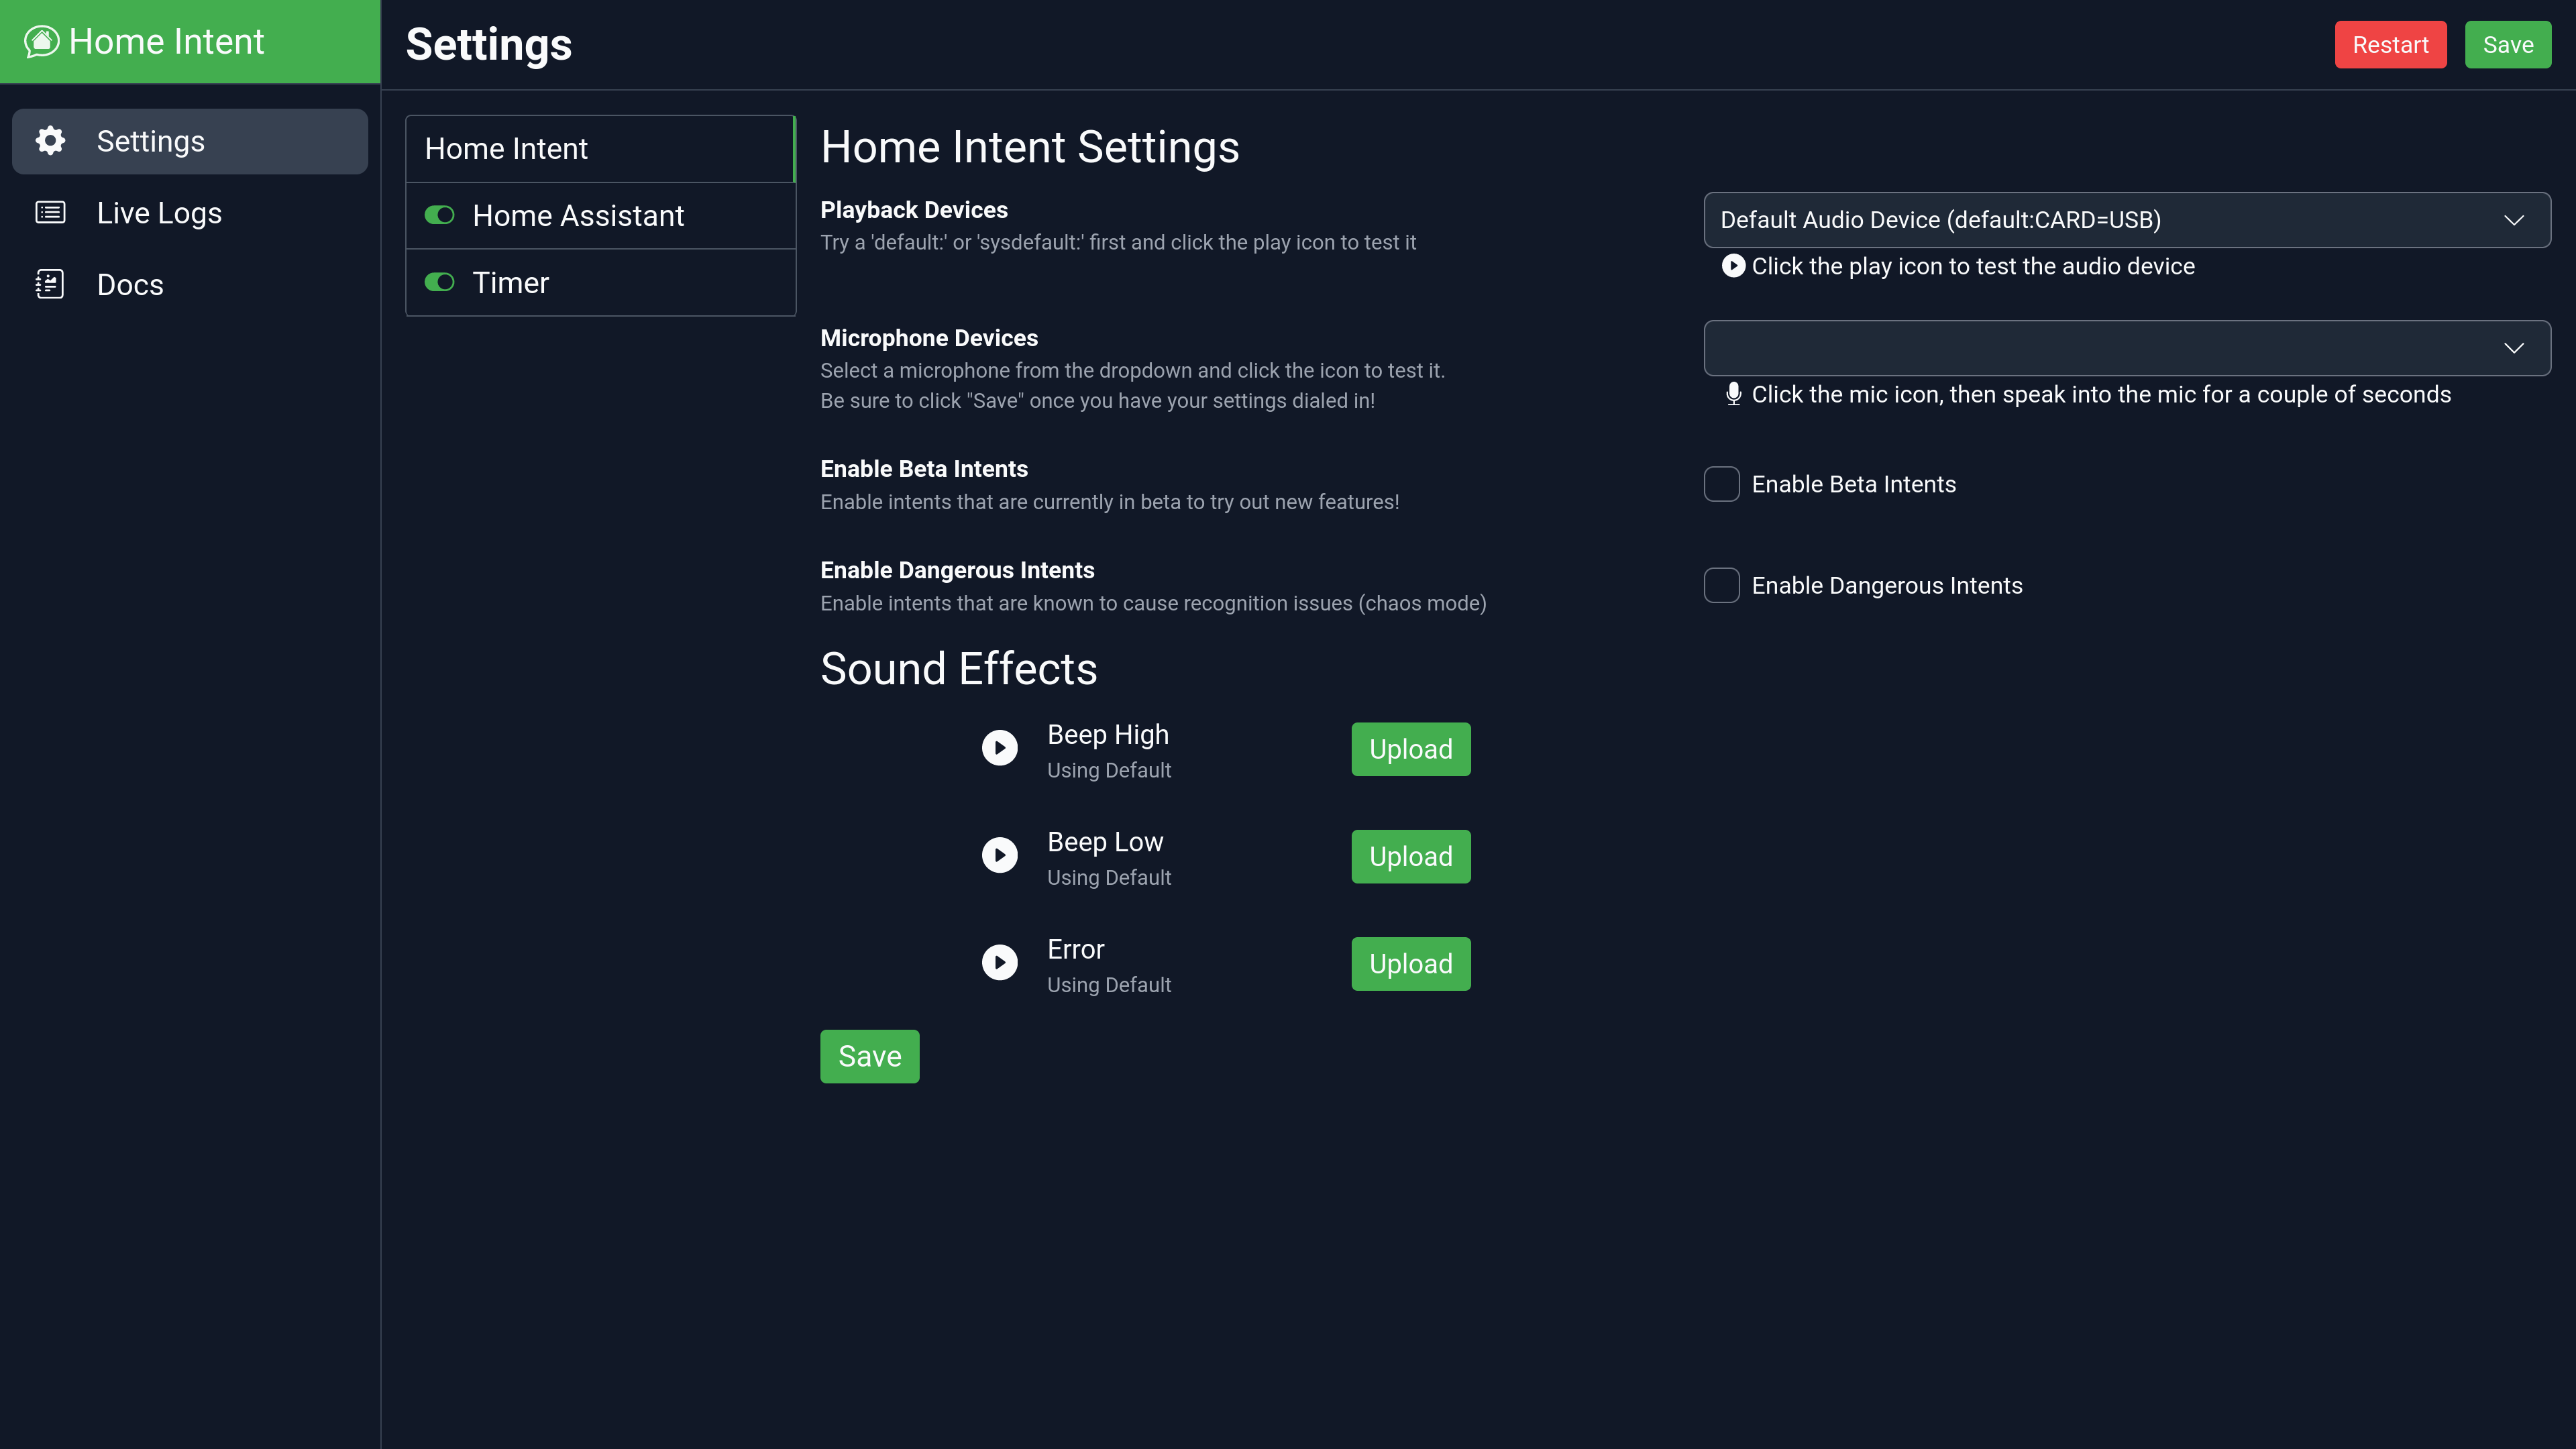 Home Intent Settings